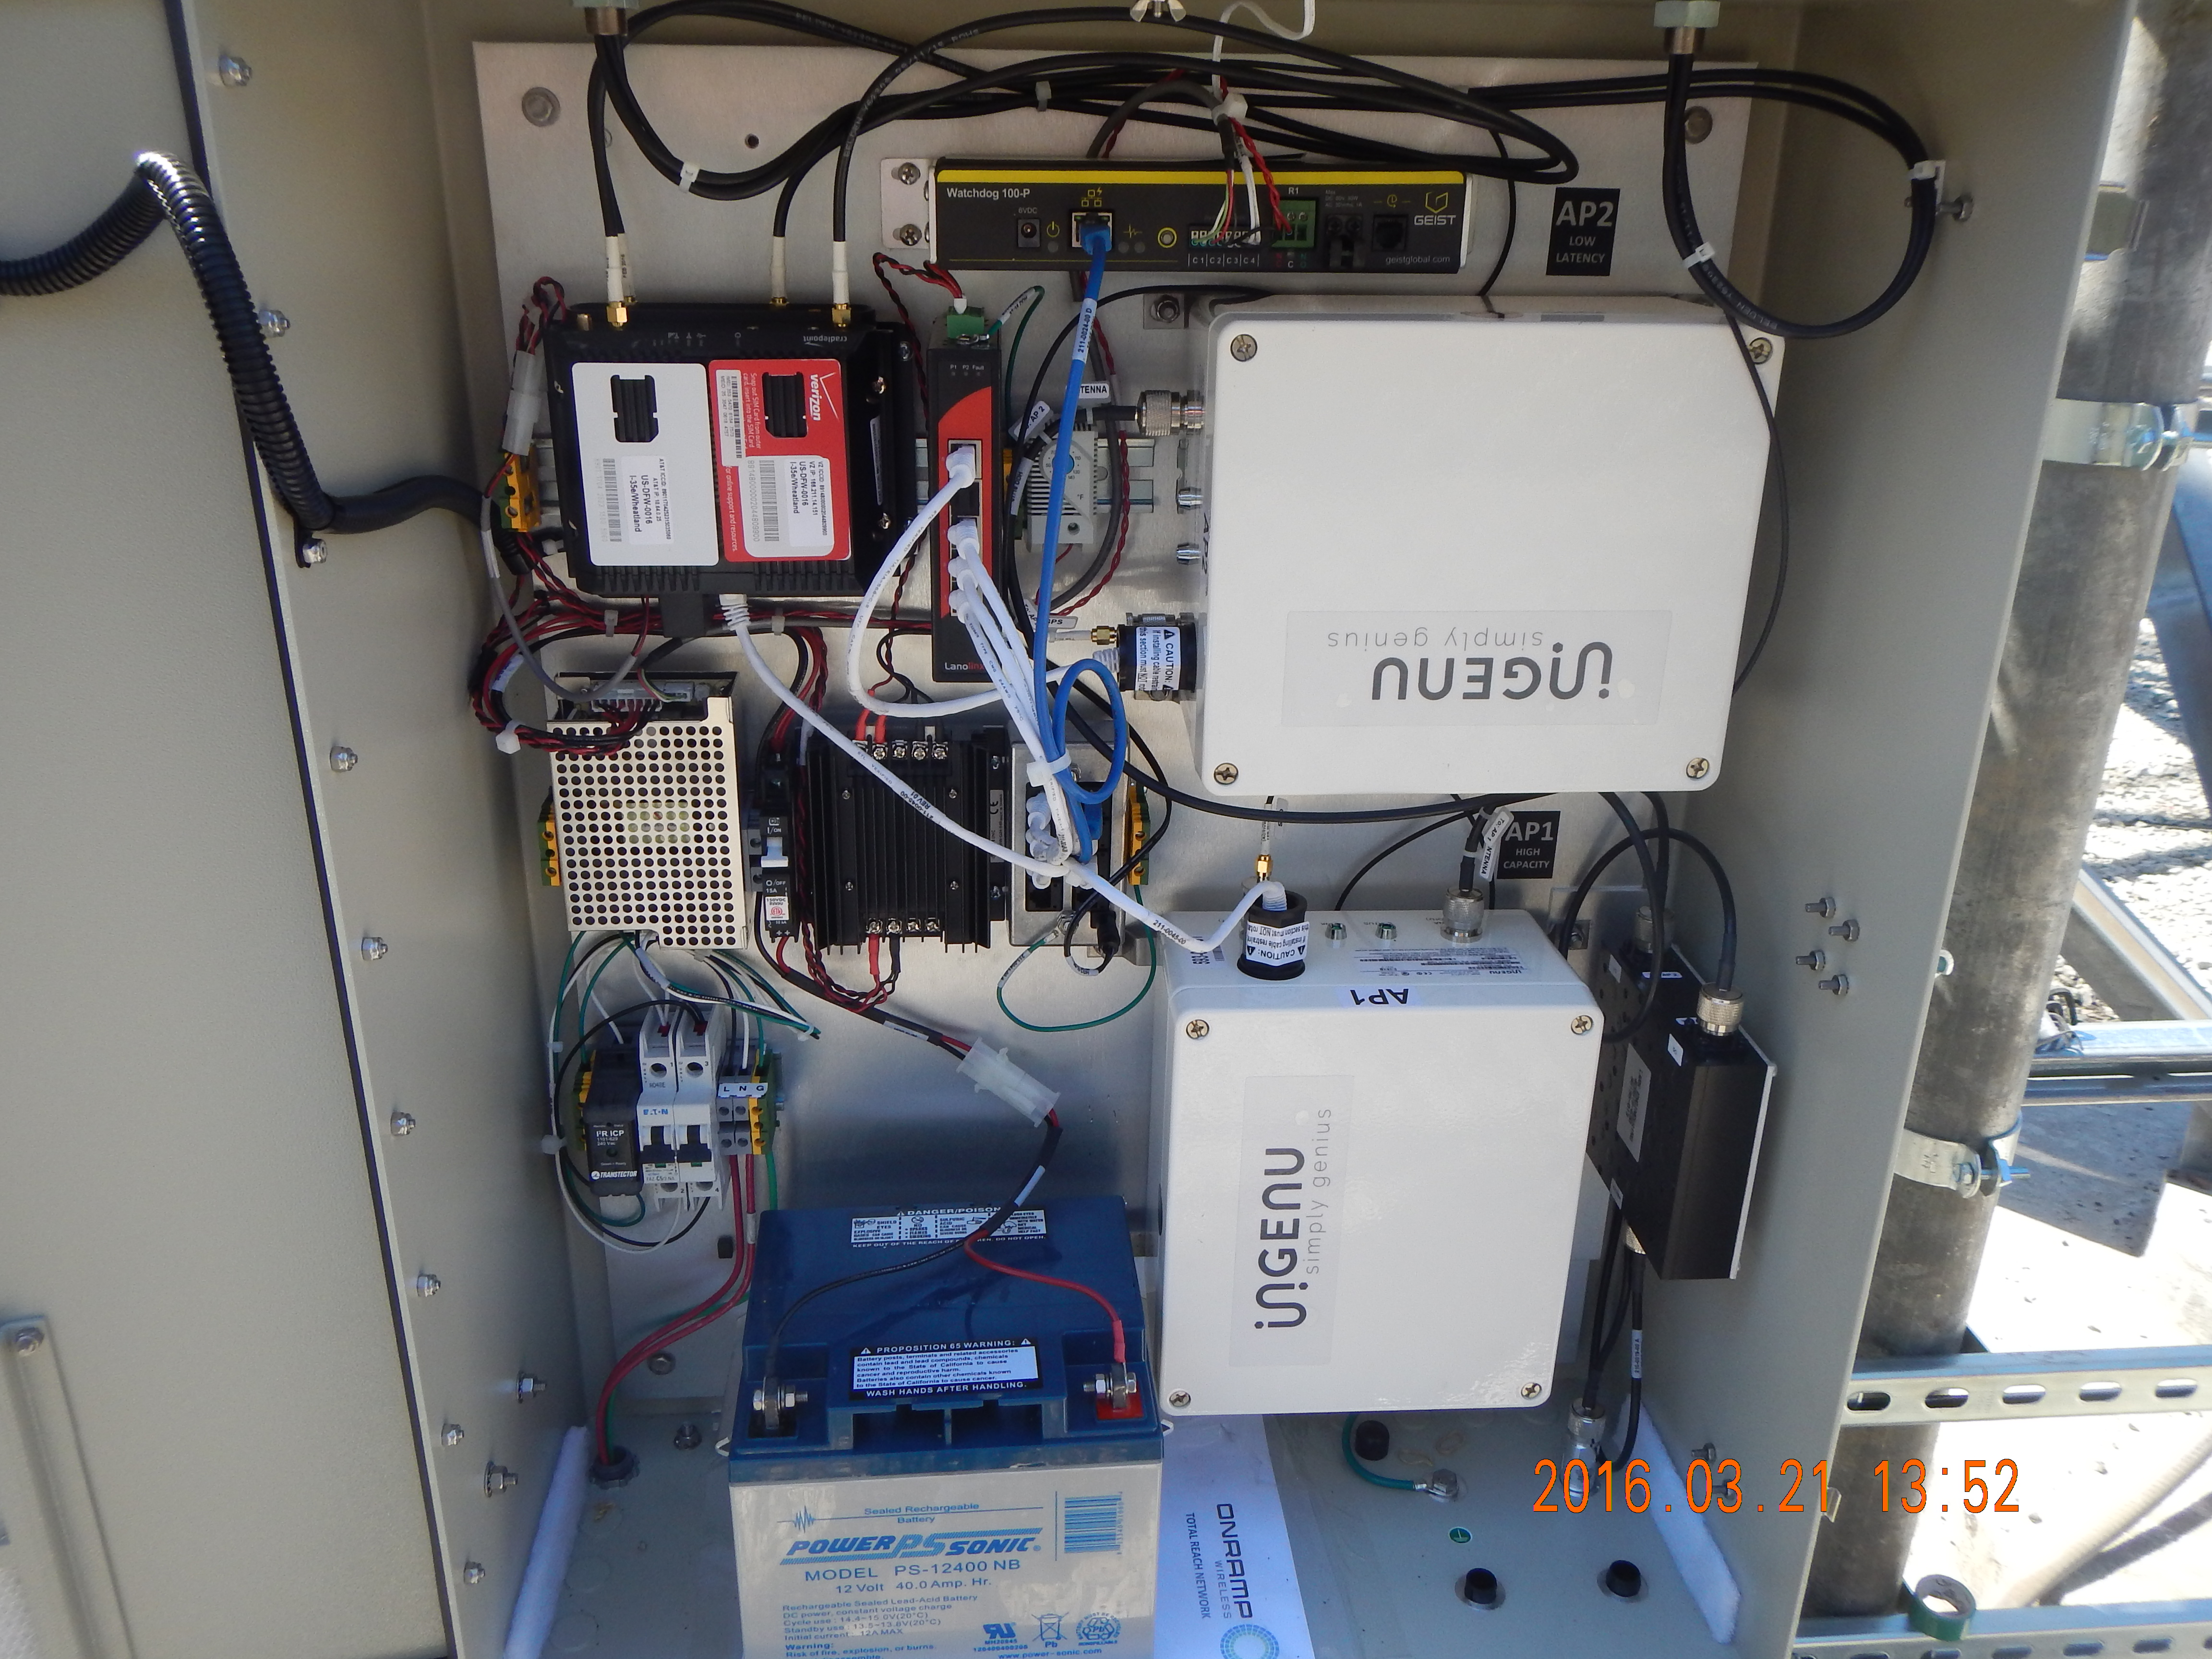 Interior view of a basestation cabinet with RPMA access points and associated networking and power equipment.